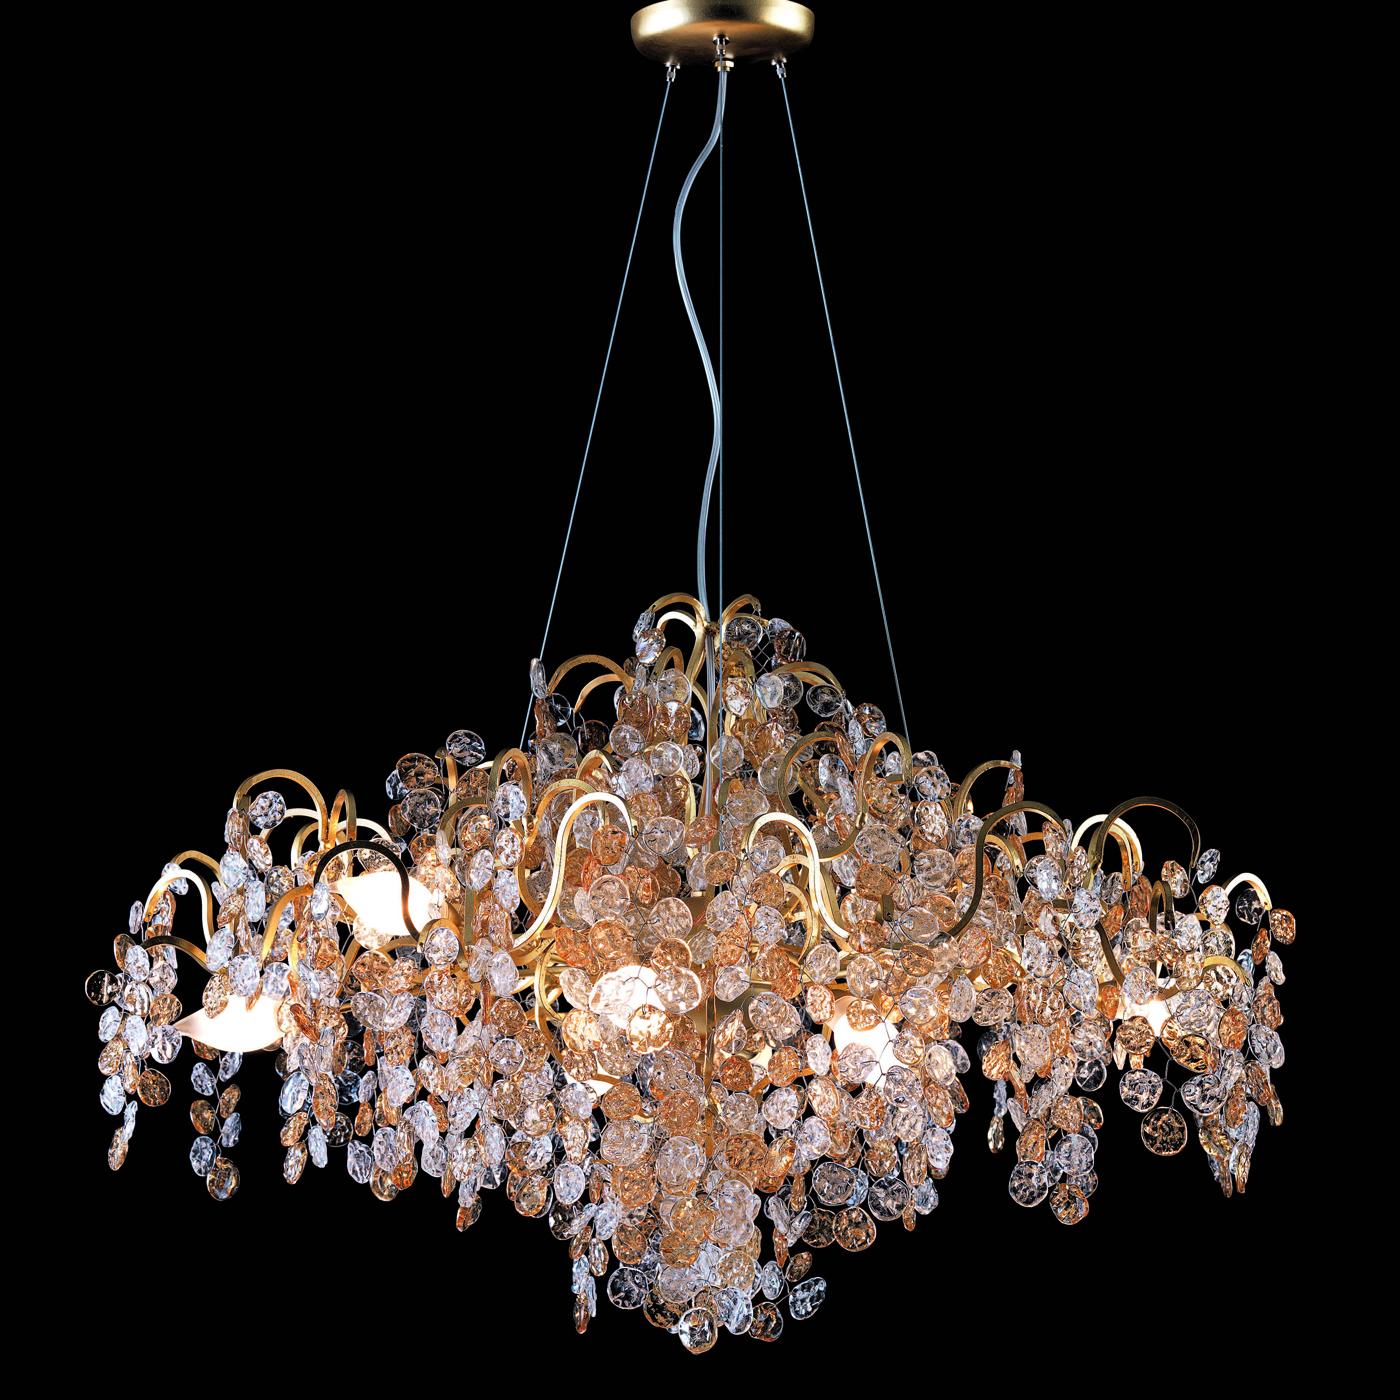 An ornate Cascade of petals in transparent glass and metal covered with gold leaf hangs from sinuous metal elements sharing with them the same, glowing coating. This is the magnificent Silhouette of the Stardust chandelier in its small version. The